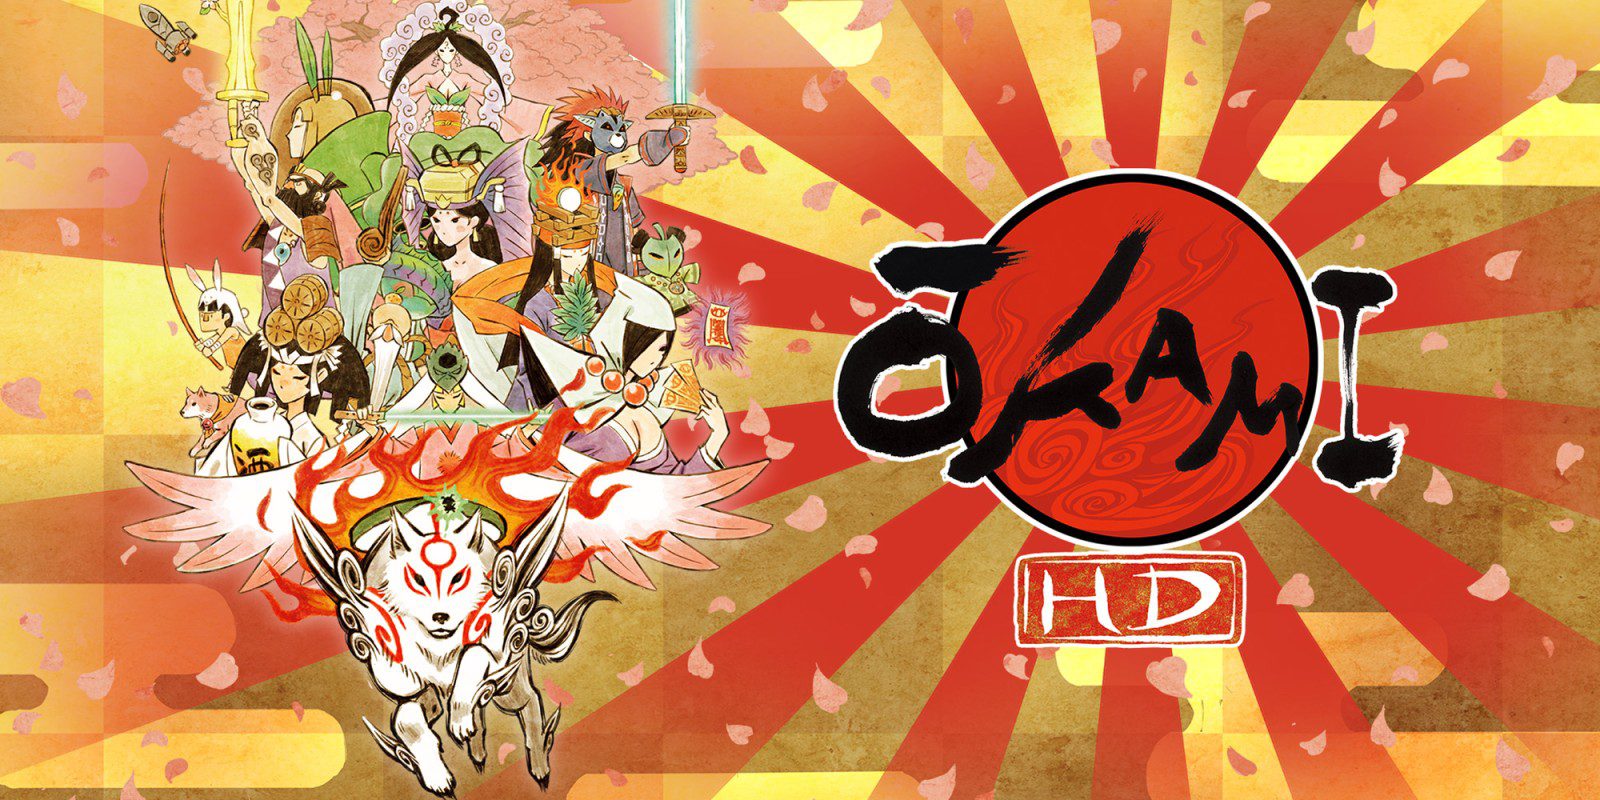 Ōkami HD finds its way onto the Nintendo Switch today